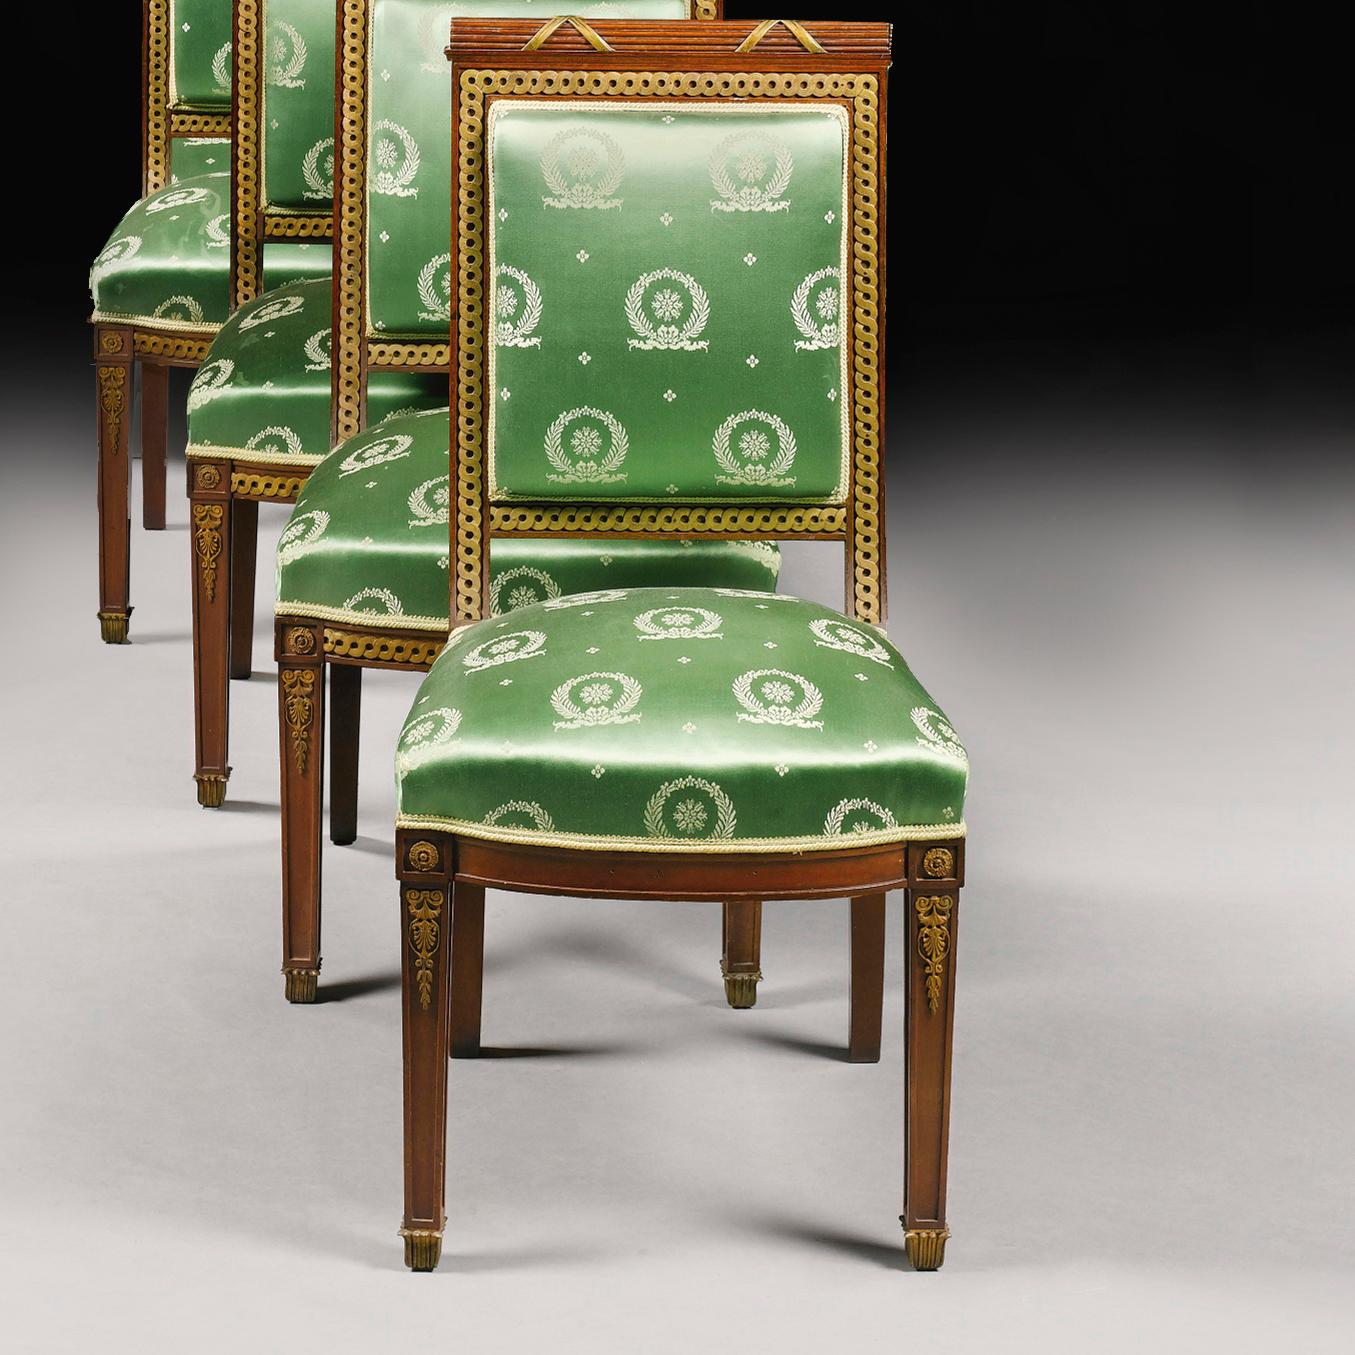 A Set of Four Mahogany And Gilt-Bronze Second Empire Salon Chairs in the Manner of Jacob-Desmalter.     

French, Circa 1880.